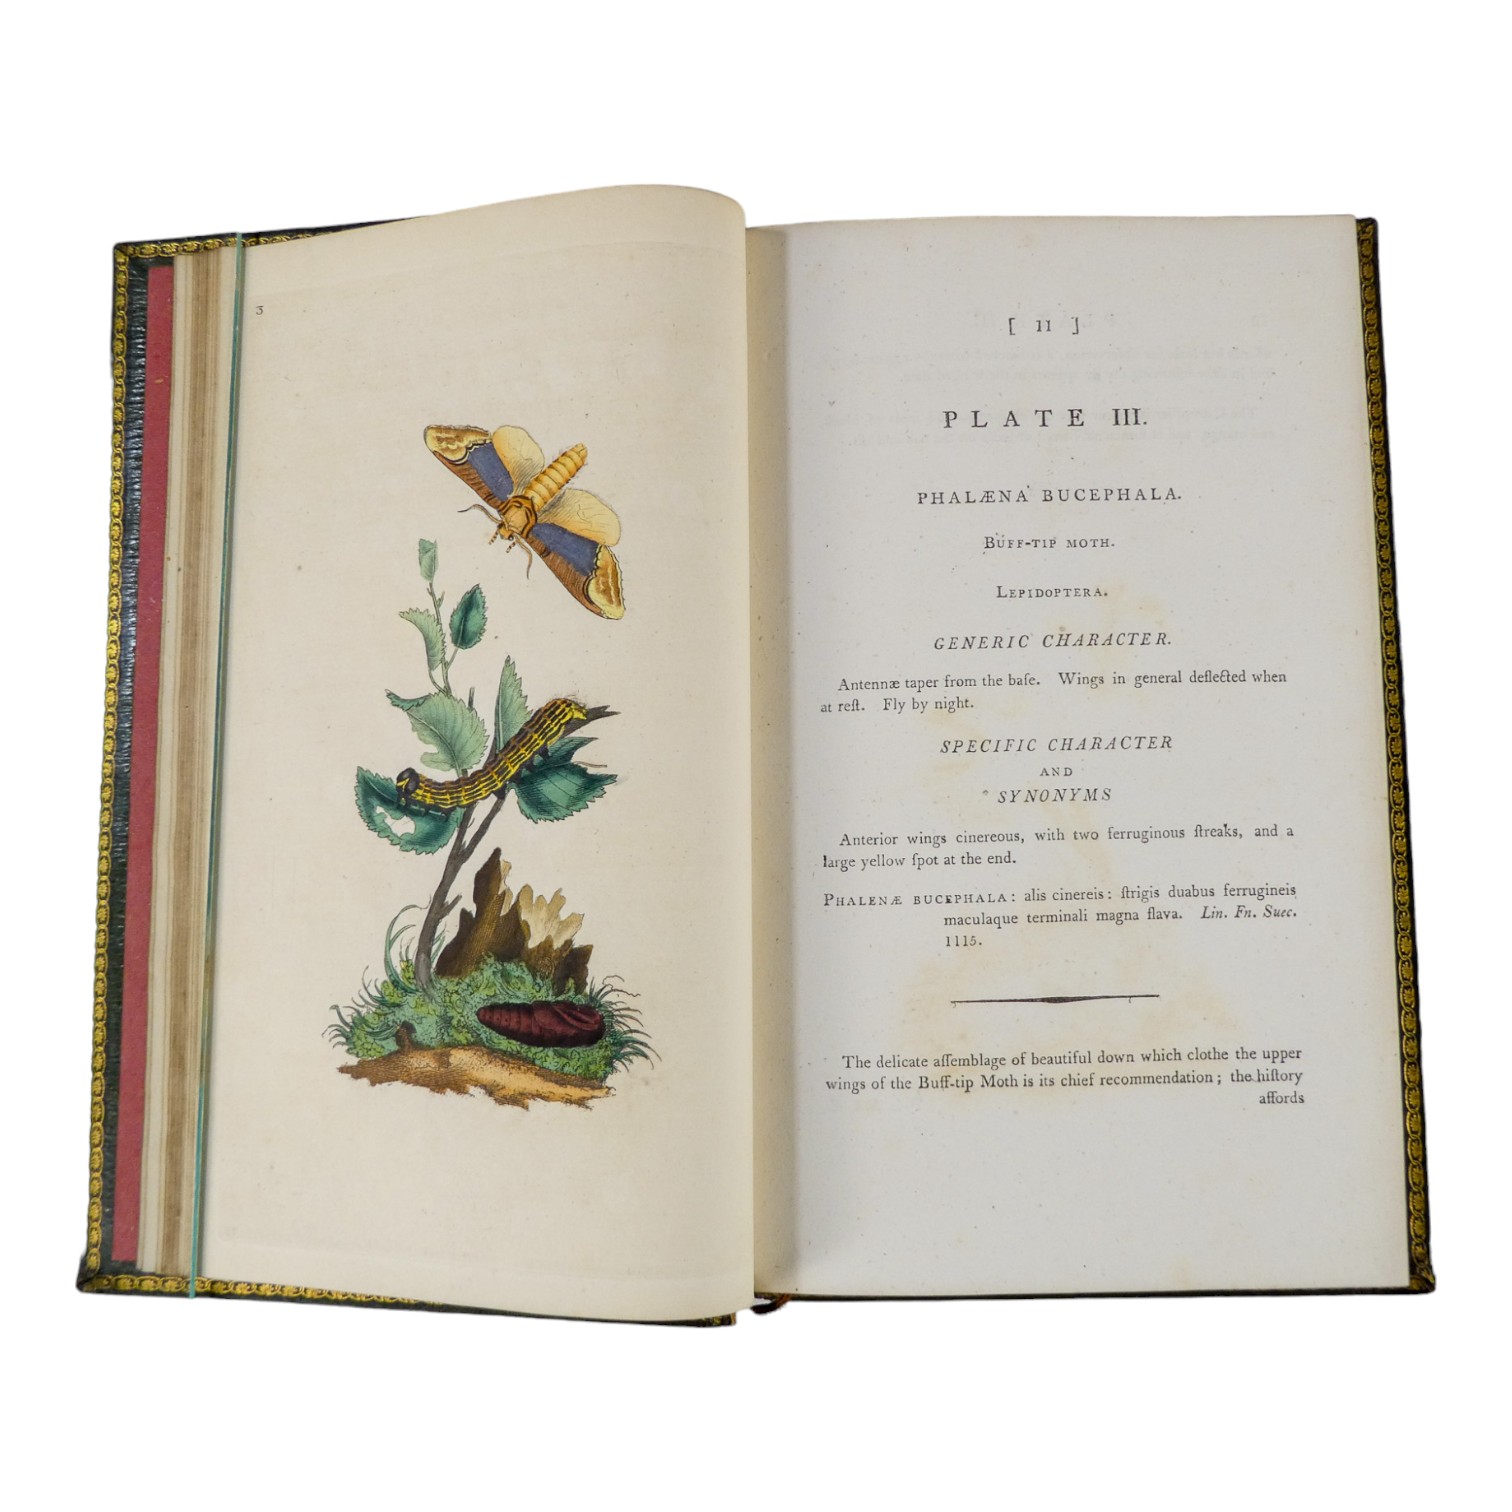 DONOVAN Edward, The Natural History of British Insects ... - published F & C Rivington 62 St Paul' - Image 5 of 33